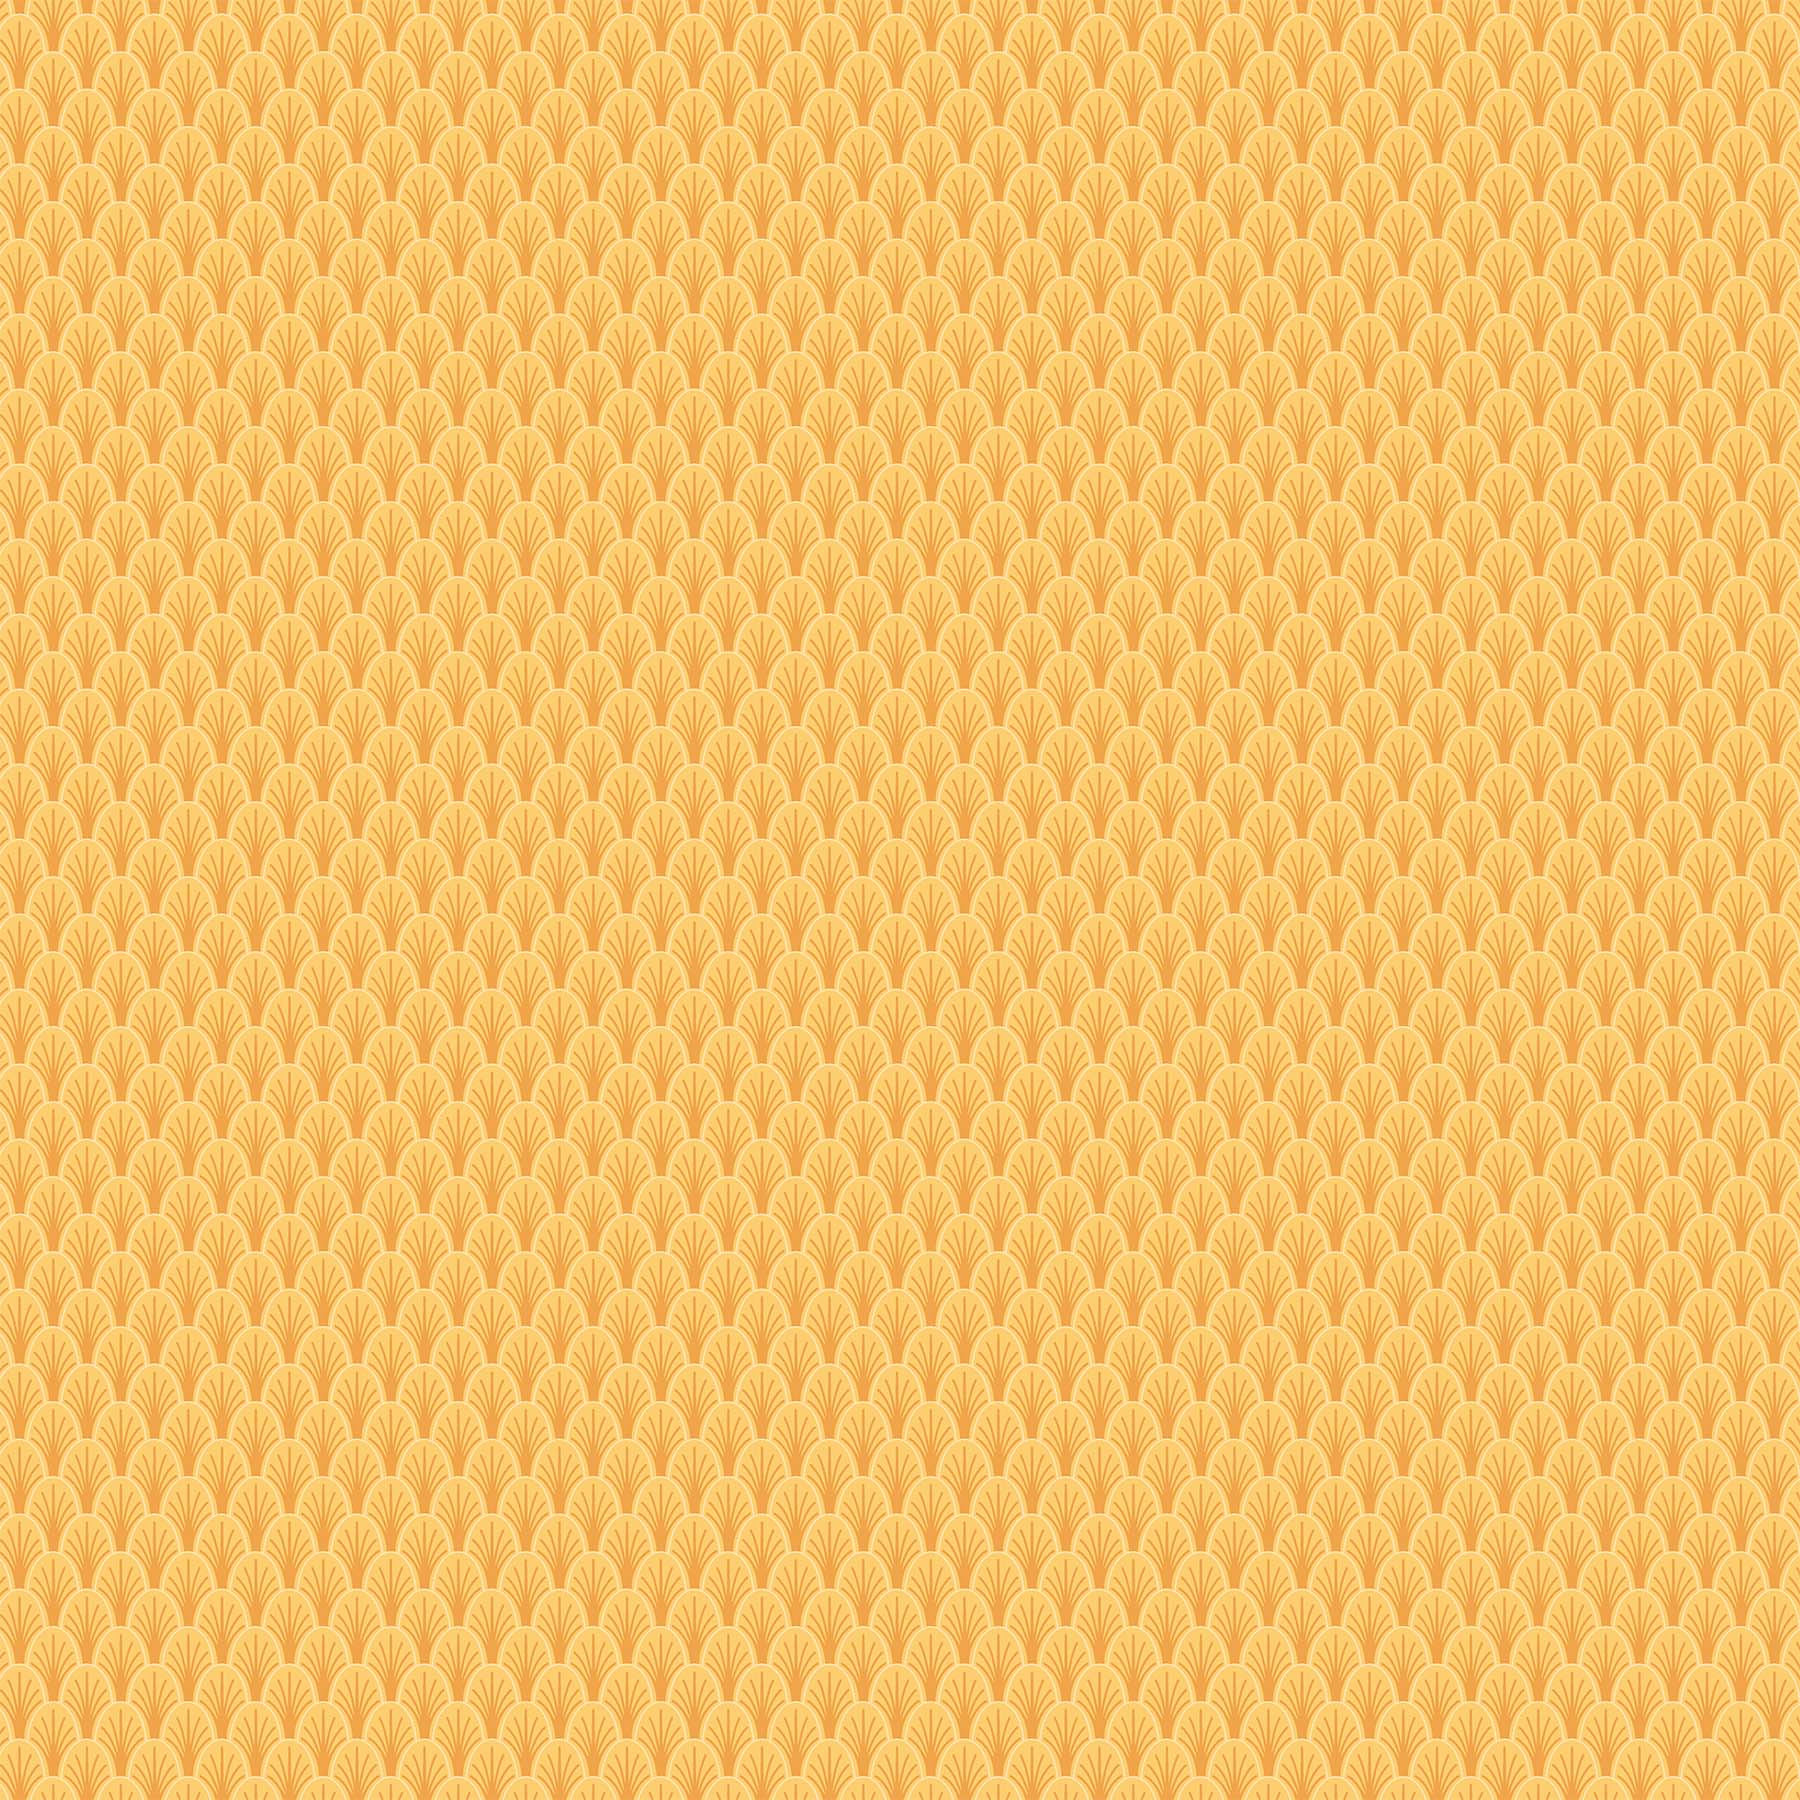 Happiness Quilt Fabric - Scallops in Yellow - 90598-50